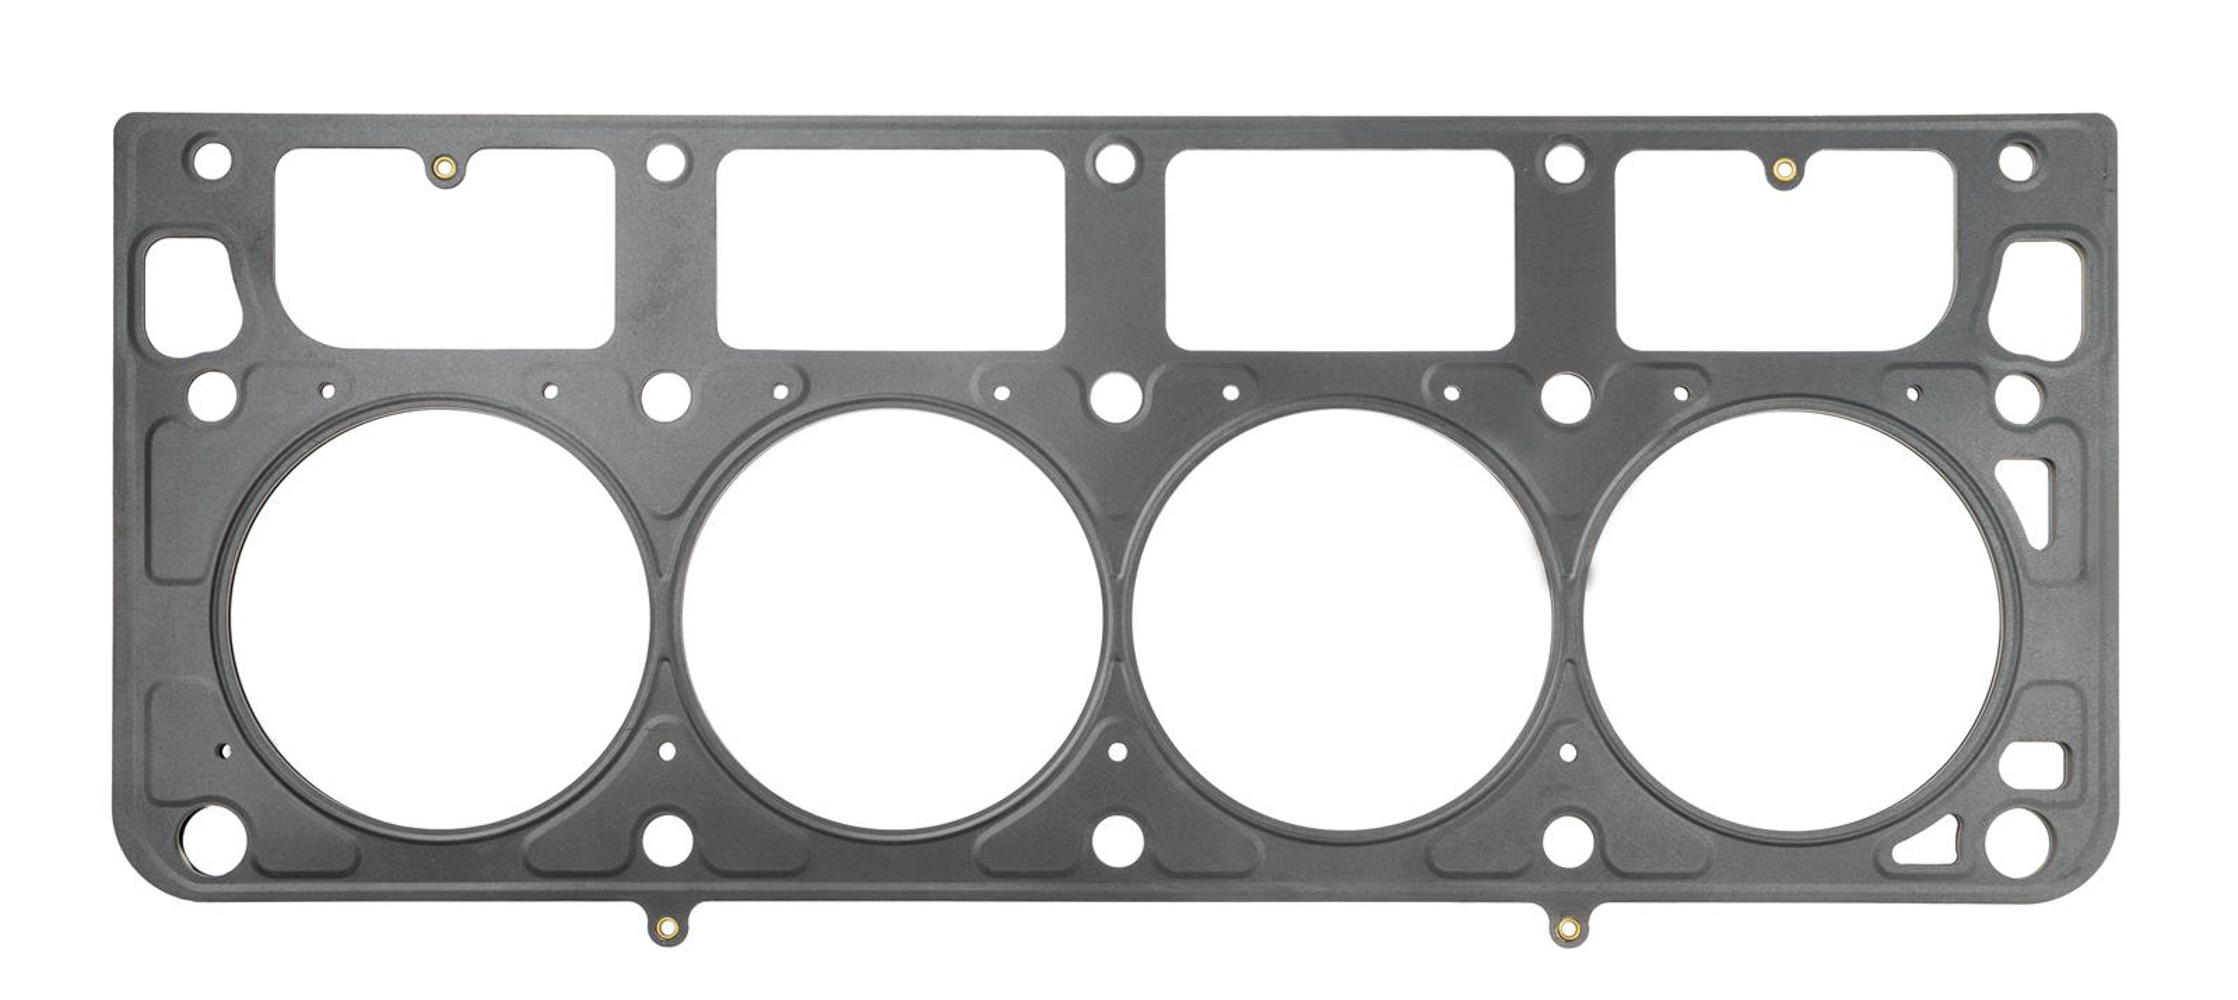 SCE Gaskets M201039 - Cylinder Head Gasket, MLS Spartan, 4.099 in Bore, 0.039 in Compression Thickness, Multi-Layer Steel, GM LS-Series, Each